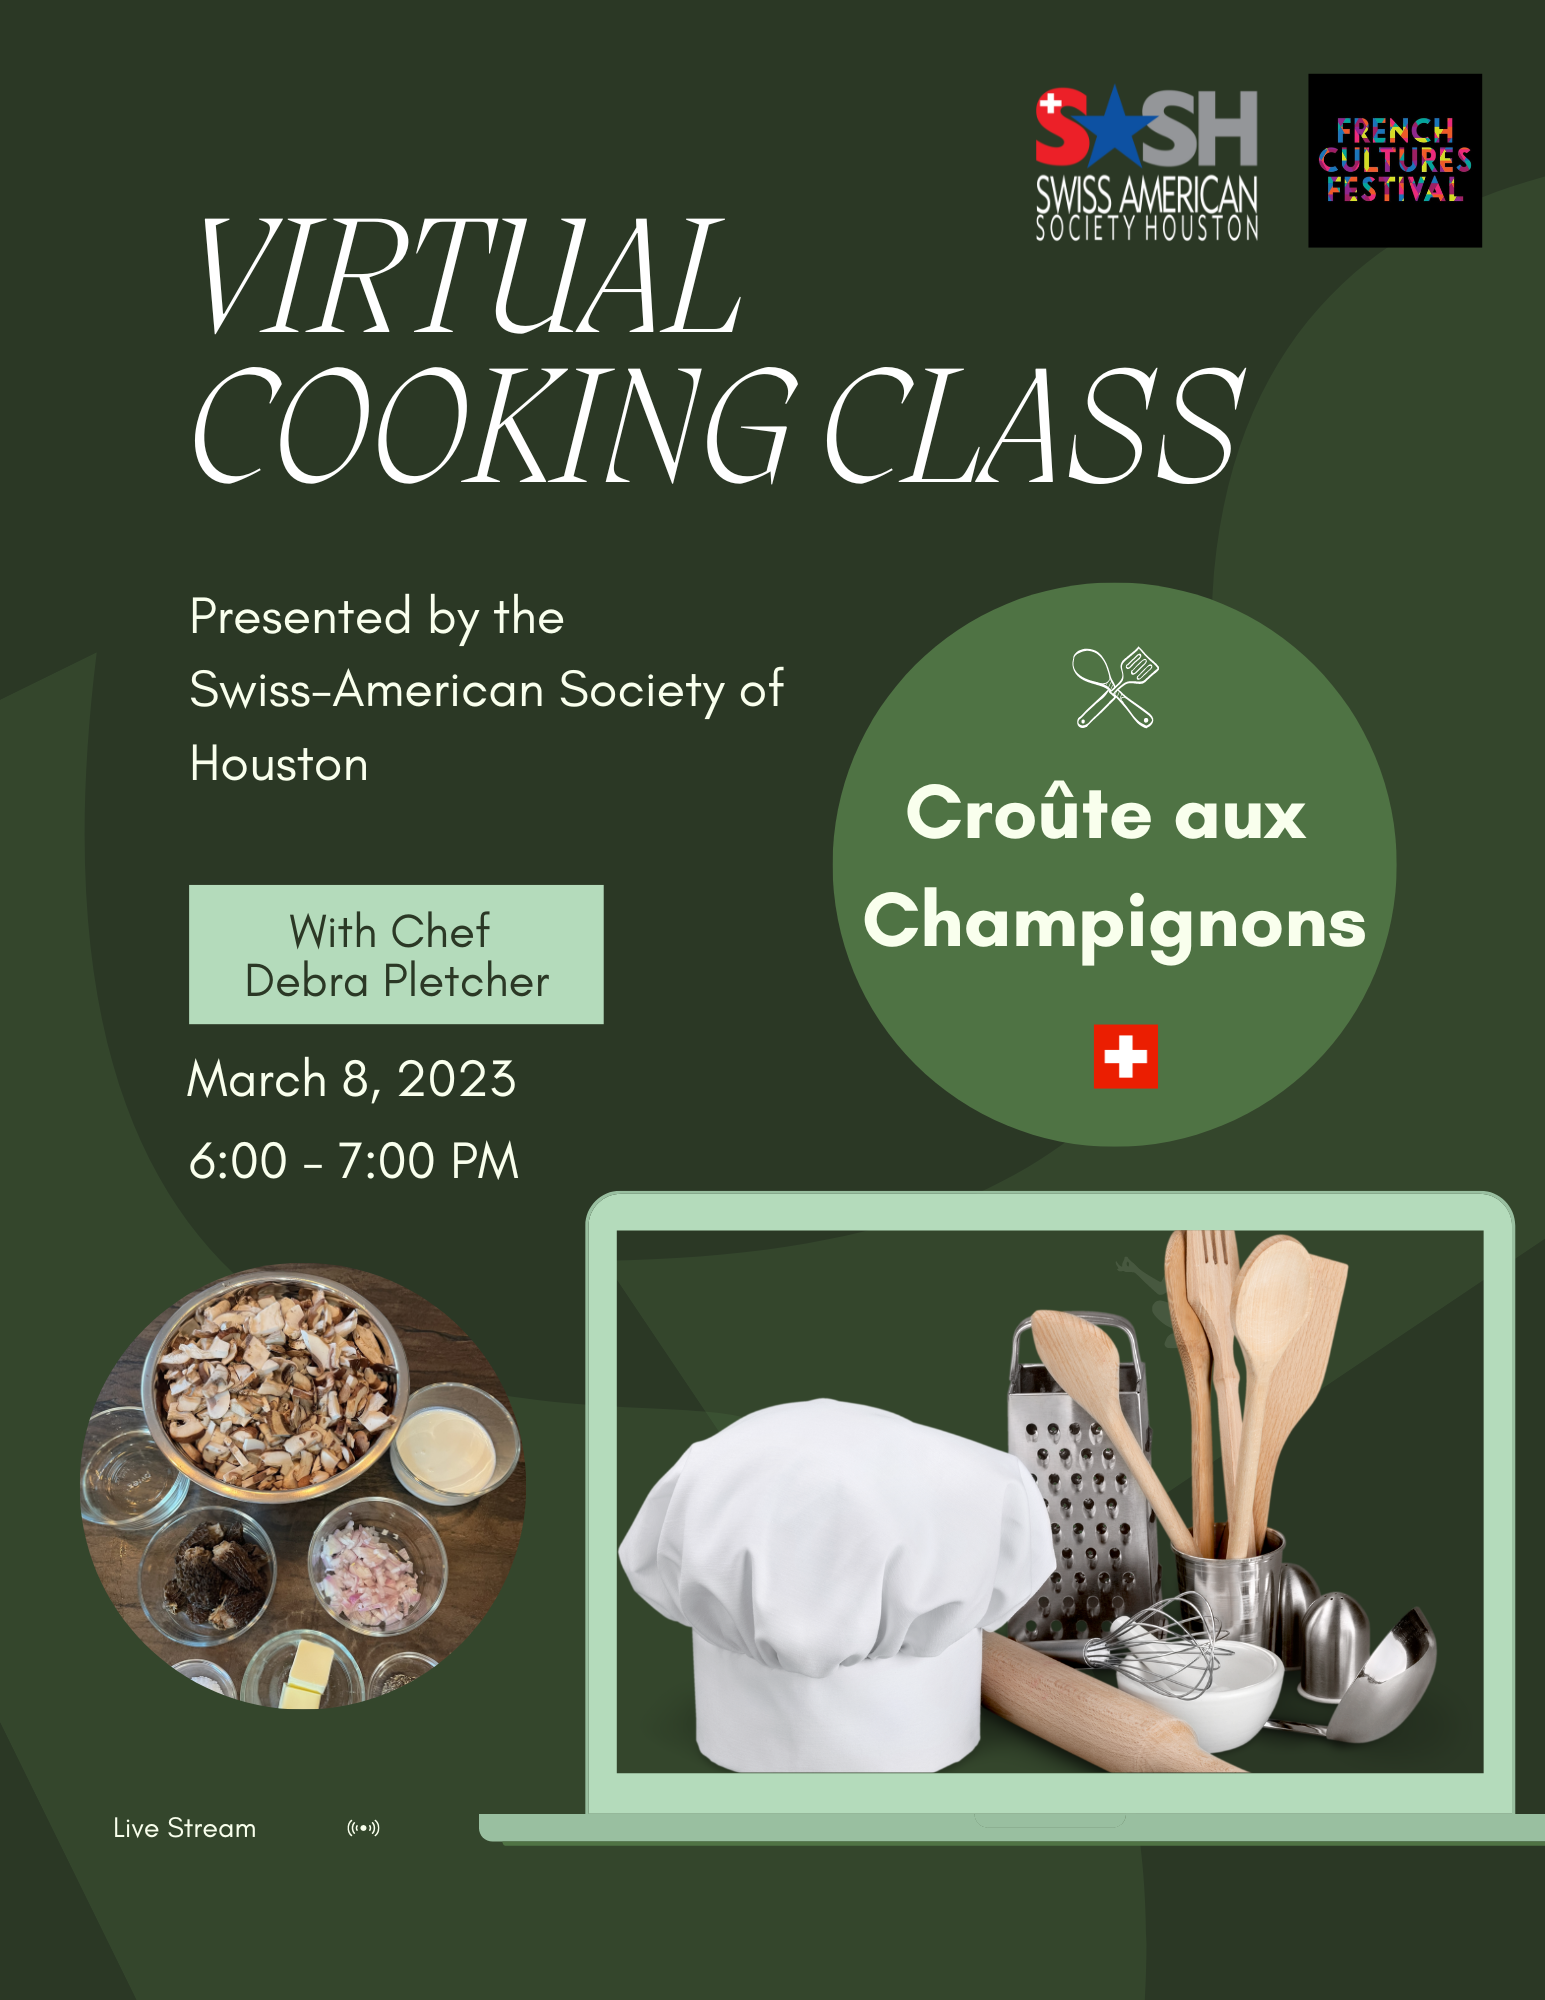 SASH 2023 French Cooking Class for Evite (8.5 × 11 in) (1) (2023_02_22 21_40_58 UTC).png